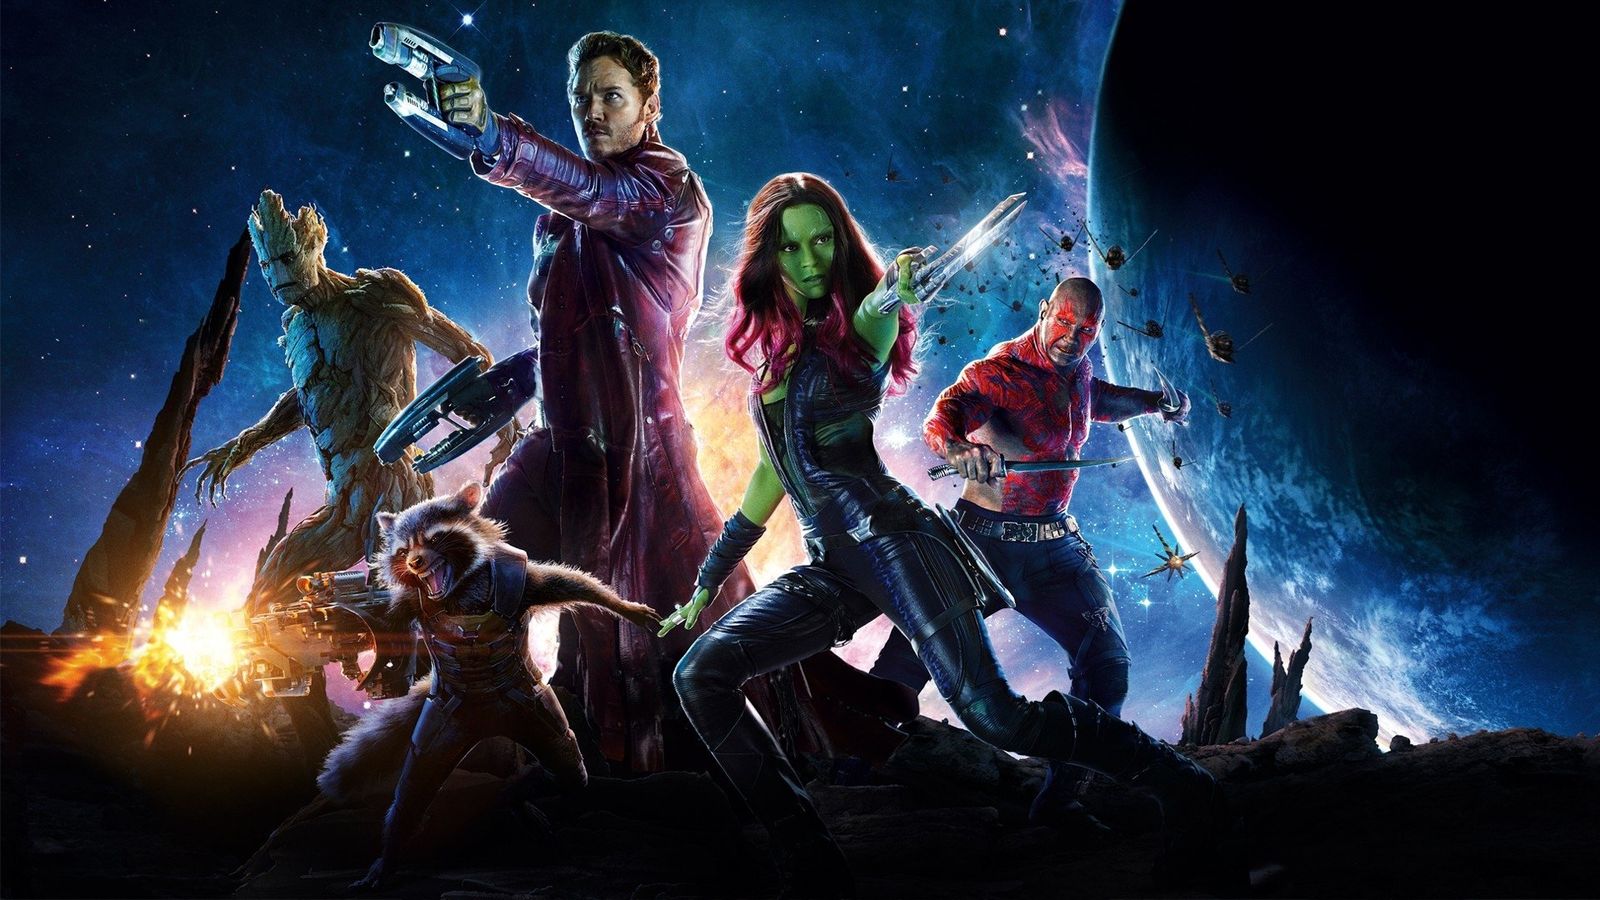 'Guardians of the Galaxy Vol 3' To Release In 2020 :Director James Gunn